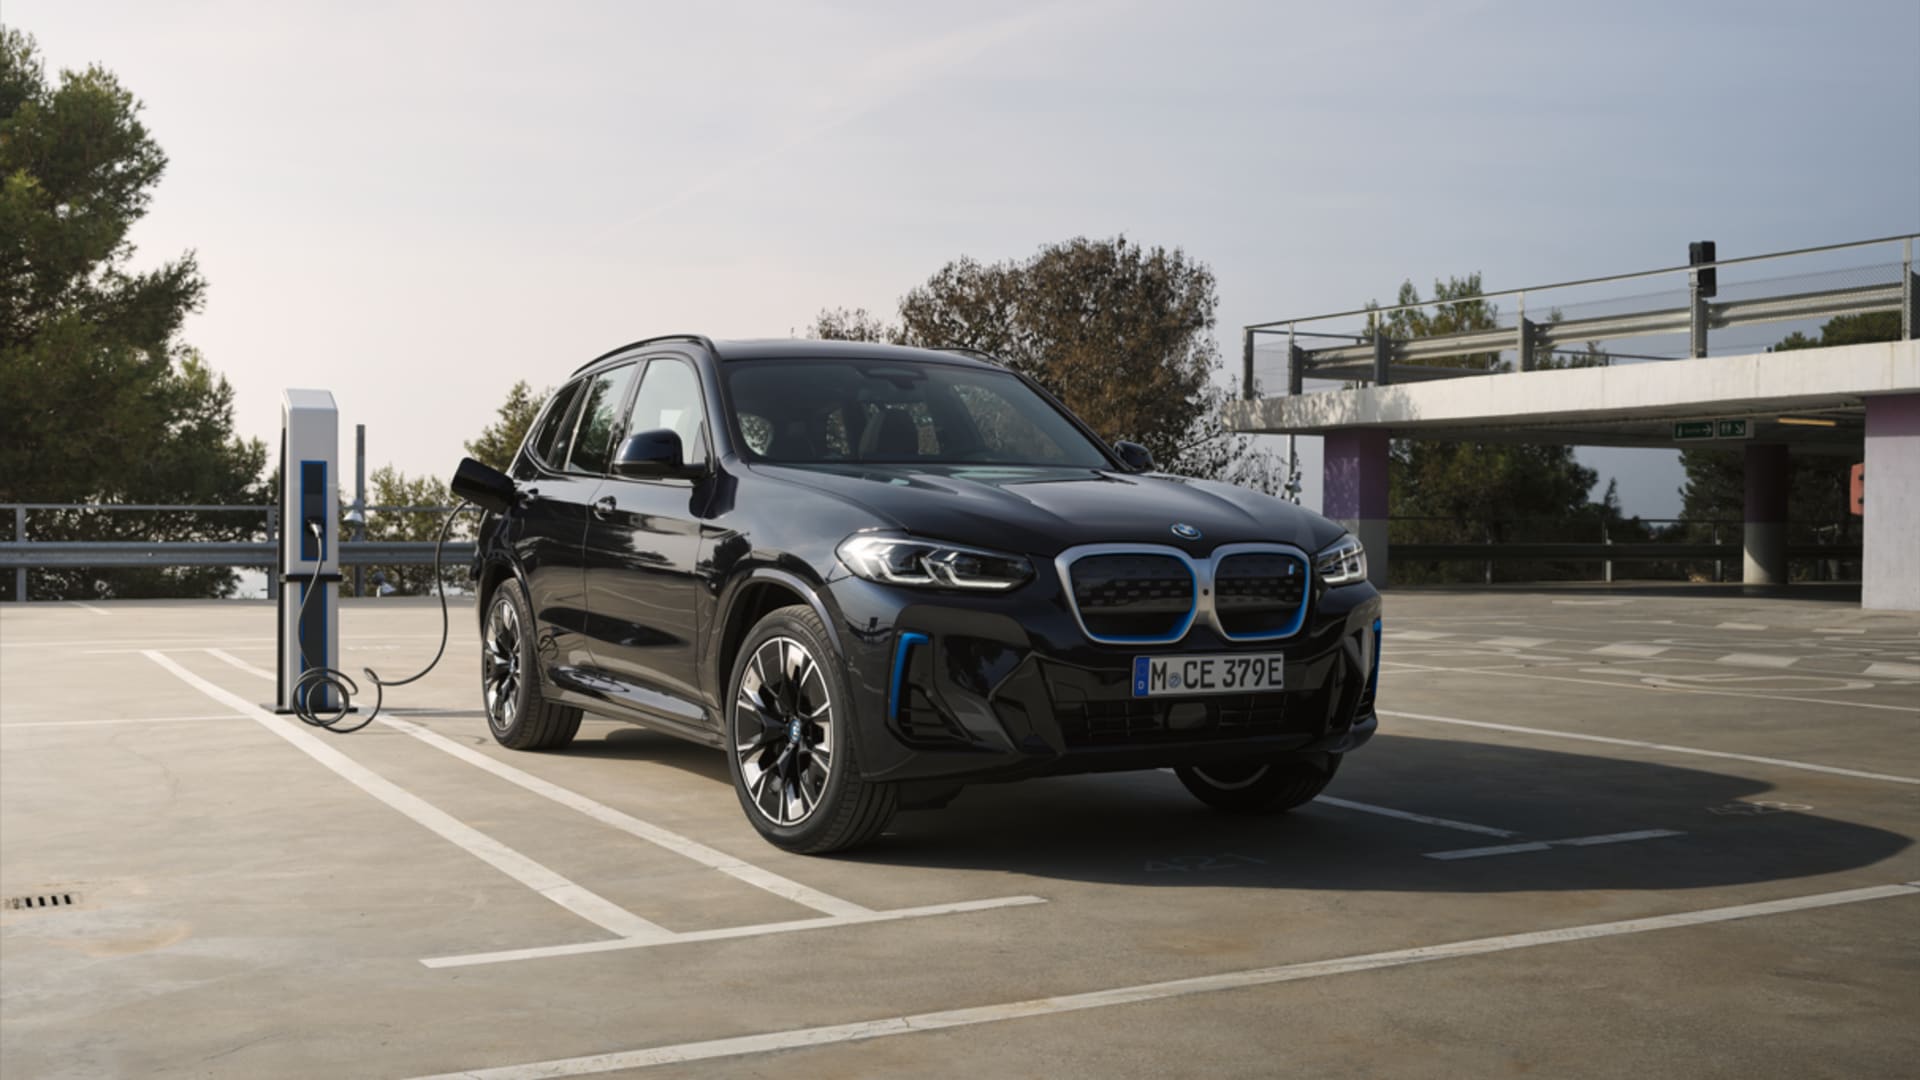 OWN YOUR BMW iX3 FROM OUR BMW PREMIUM SELECTION Selection